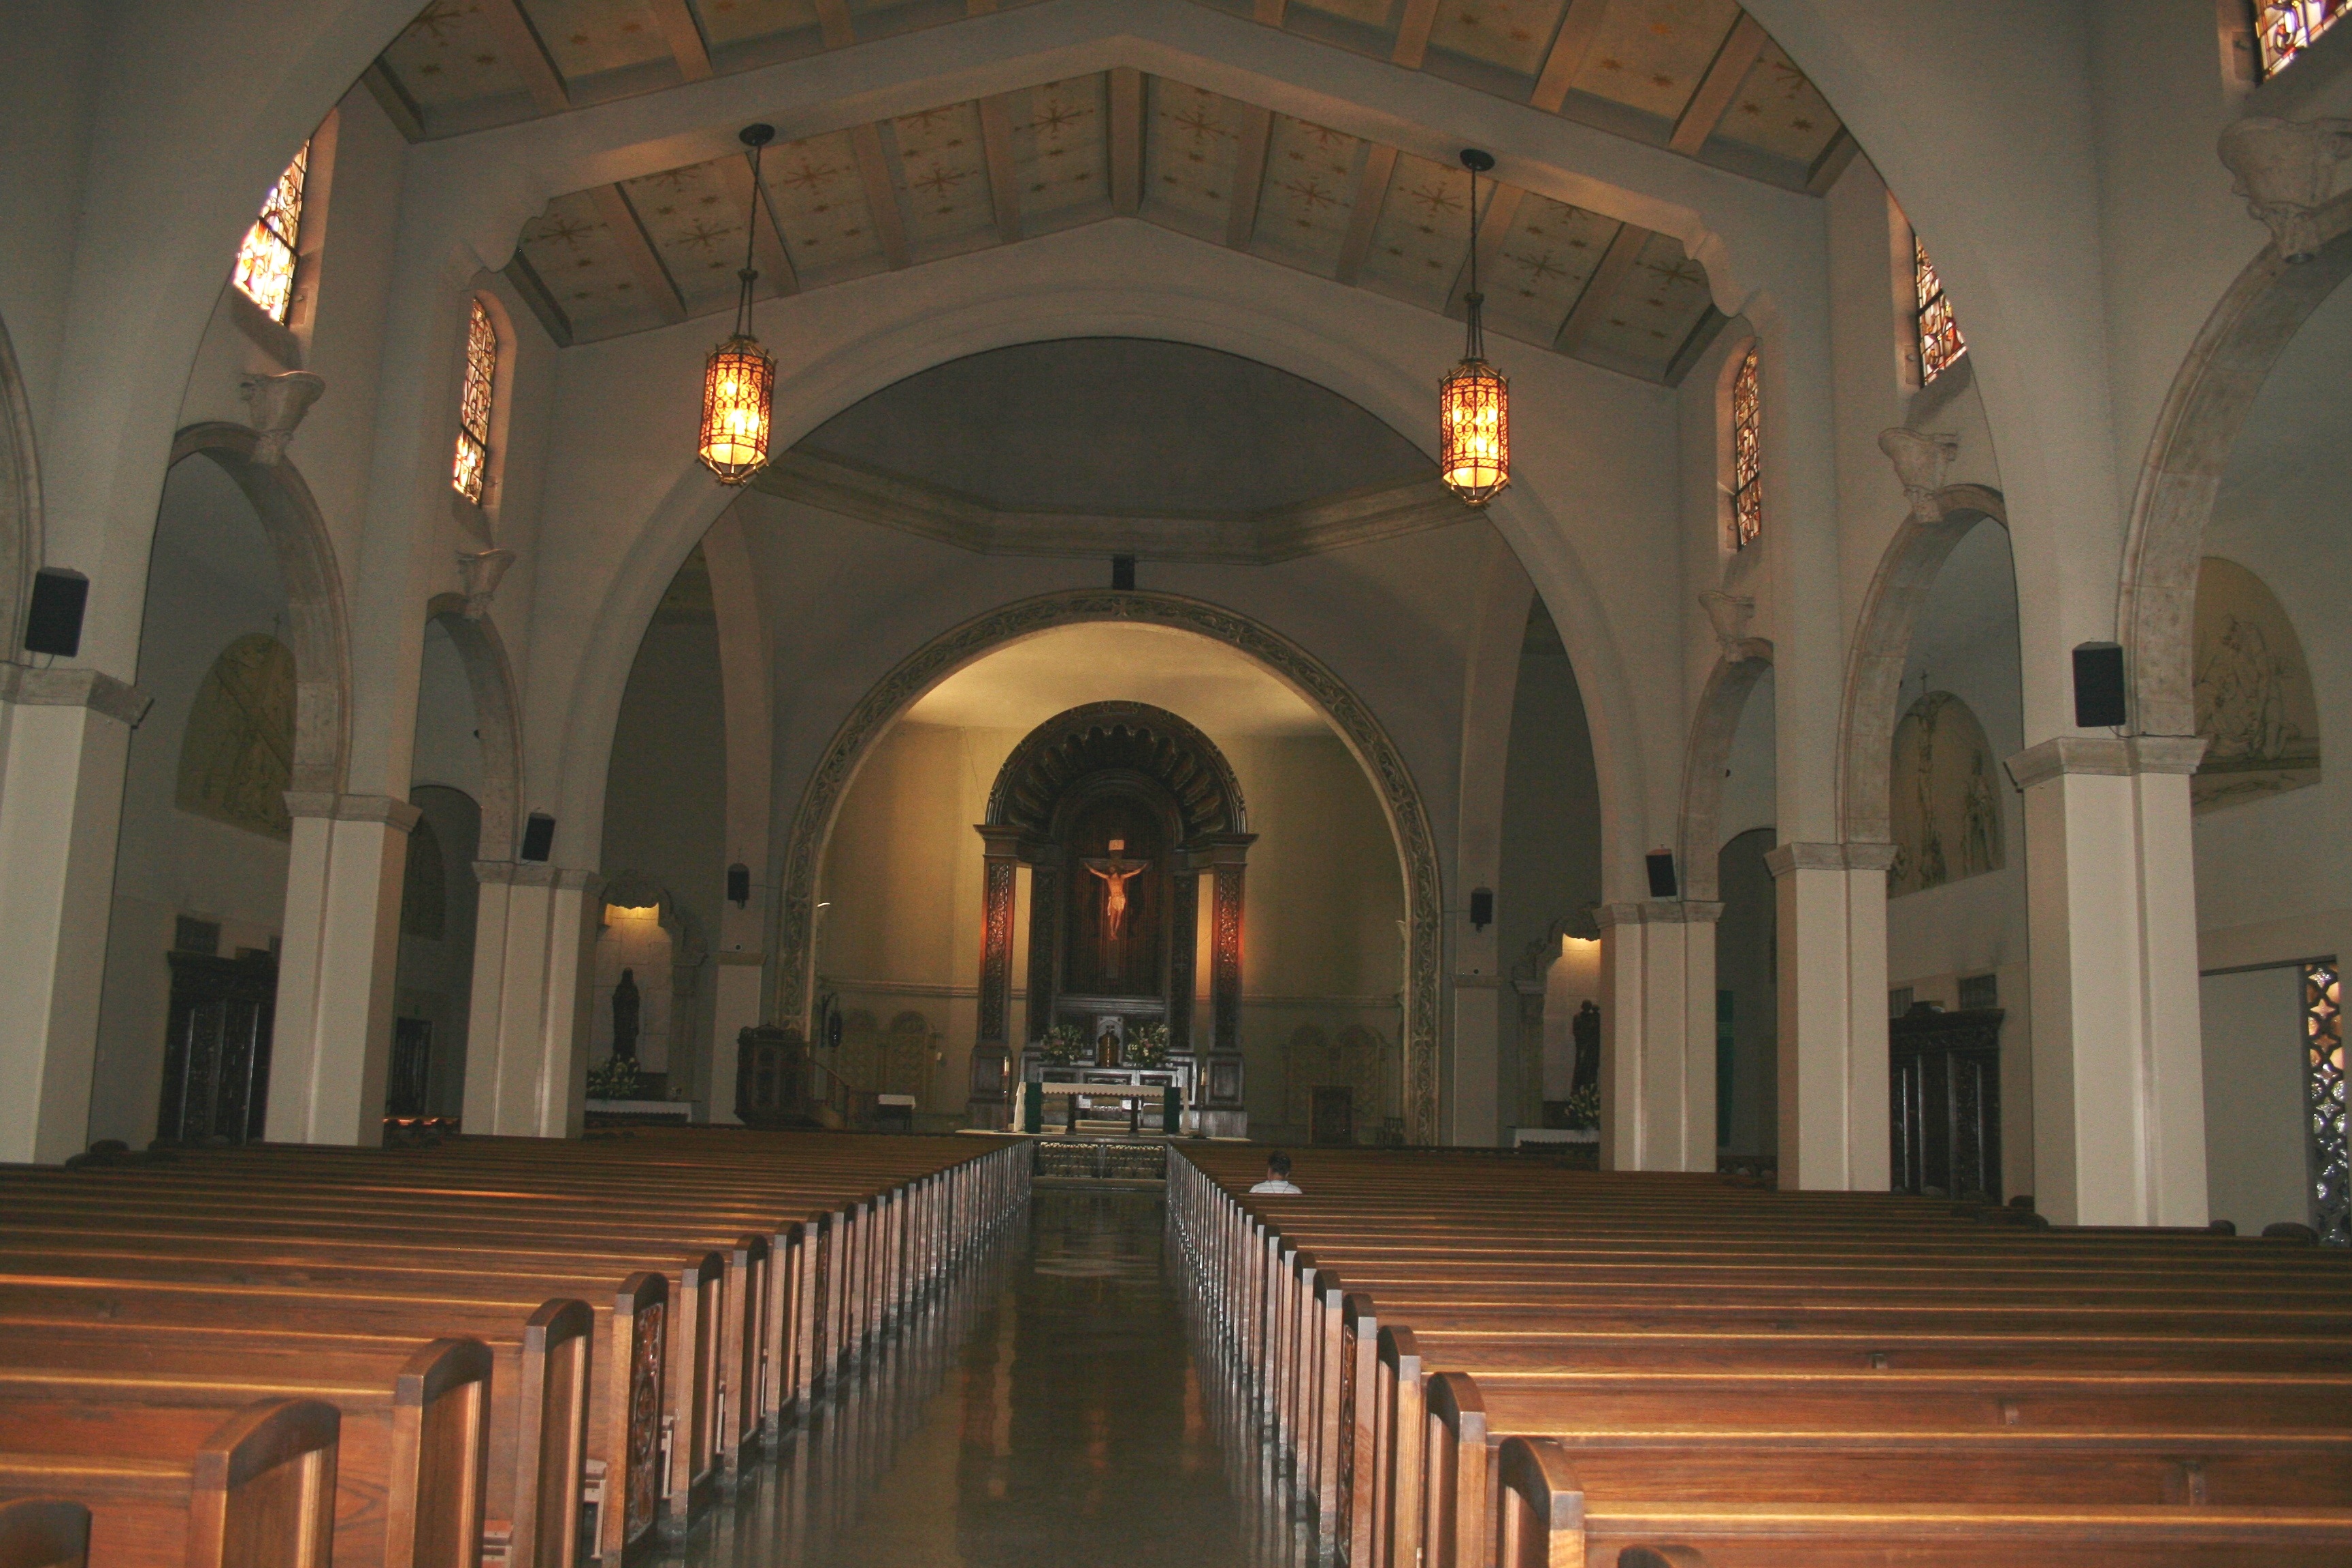 St. Charles Sanctuary before the renovation with new lighting.